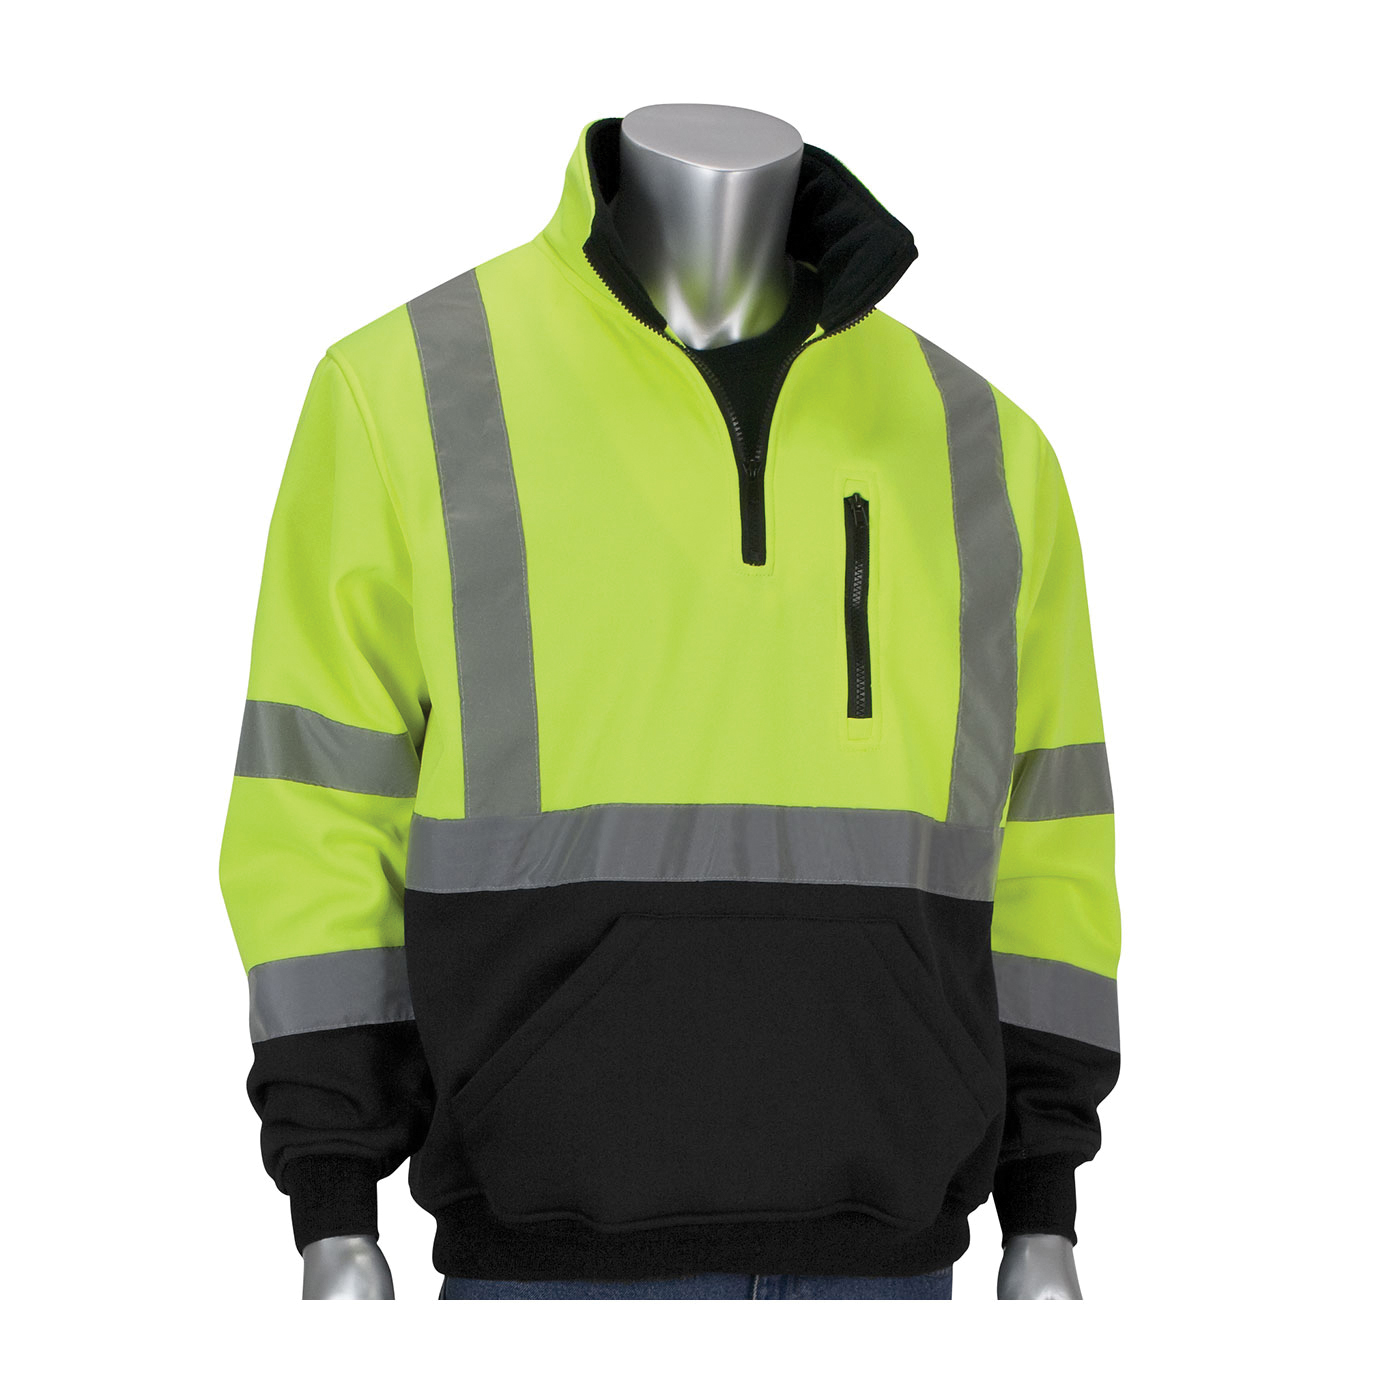 PIP® 323-1330B-LY/S Sweatshirt With Black Bottom, Unisex, S, Lime Yellow, 28.3 in L, Polyester Fleece